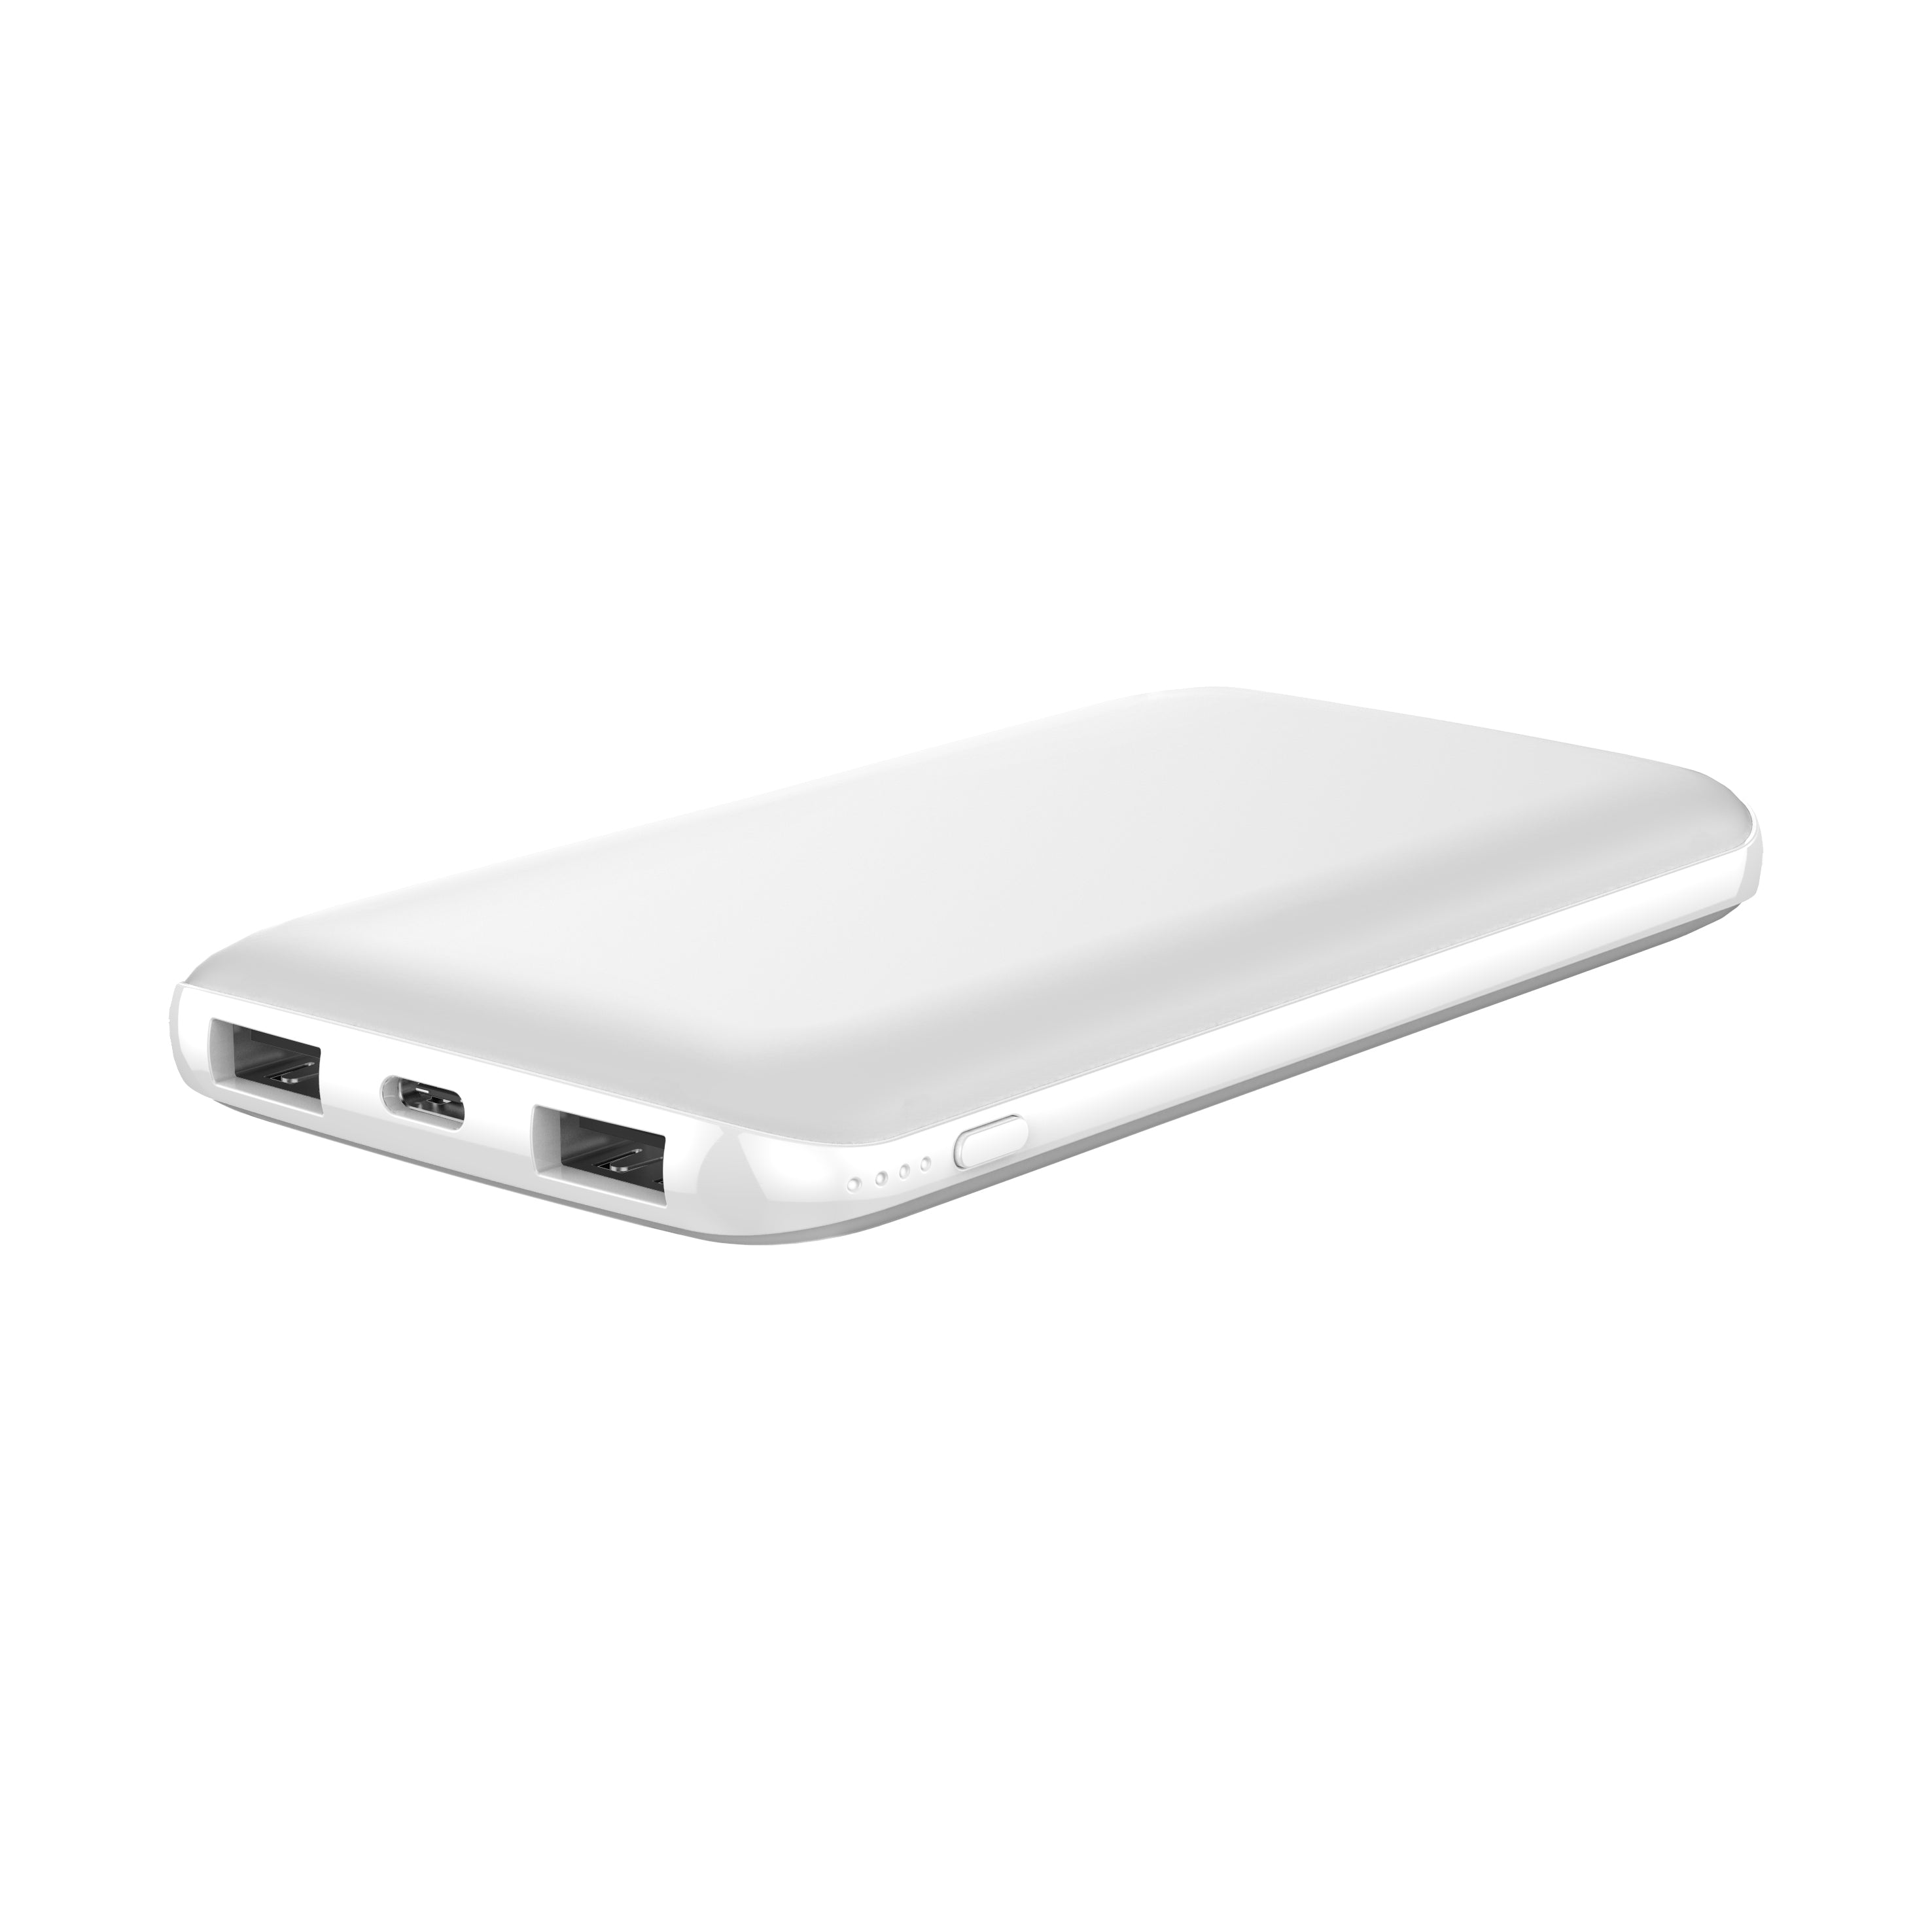 REF Power Fast Charge "C-Port" Portable Power Bank White